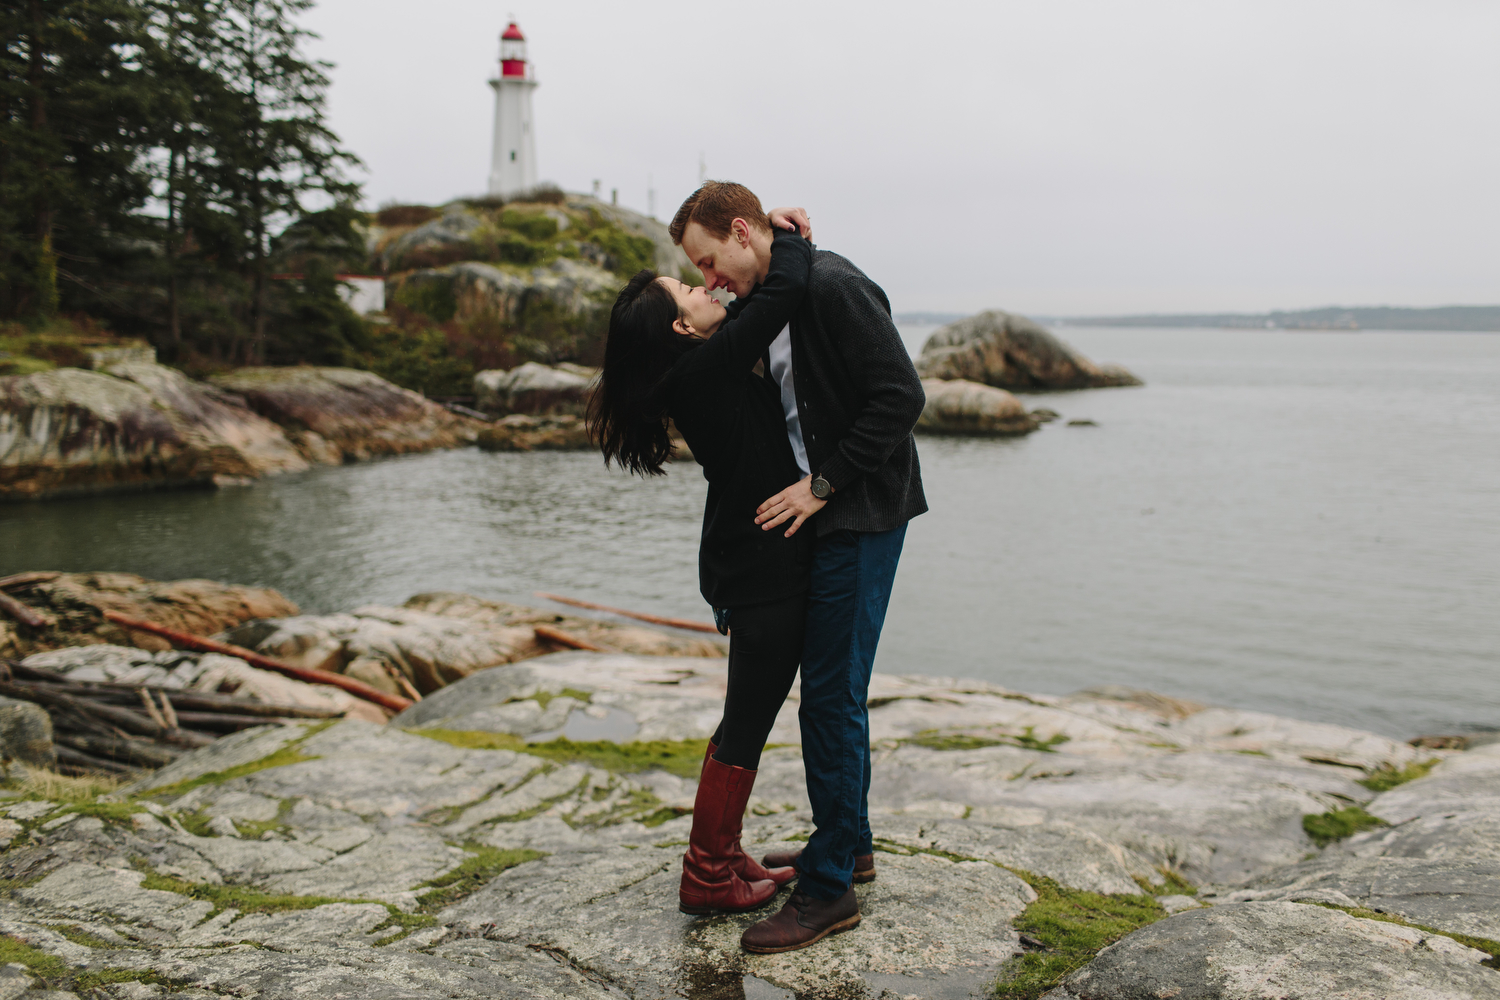 Lighthouse Park Engagement Photos in West Vancouver